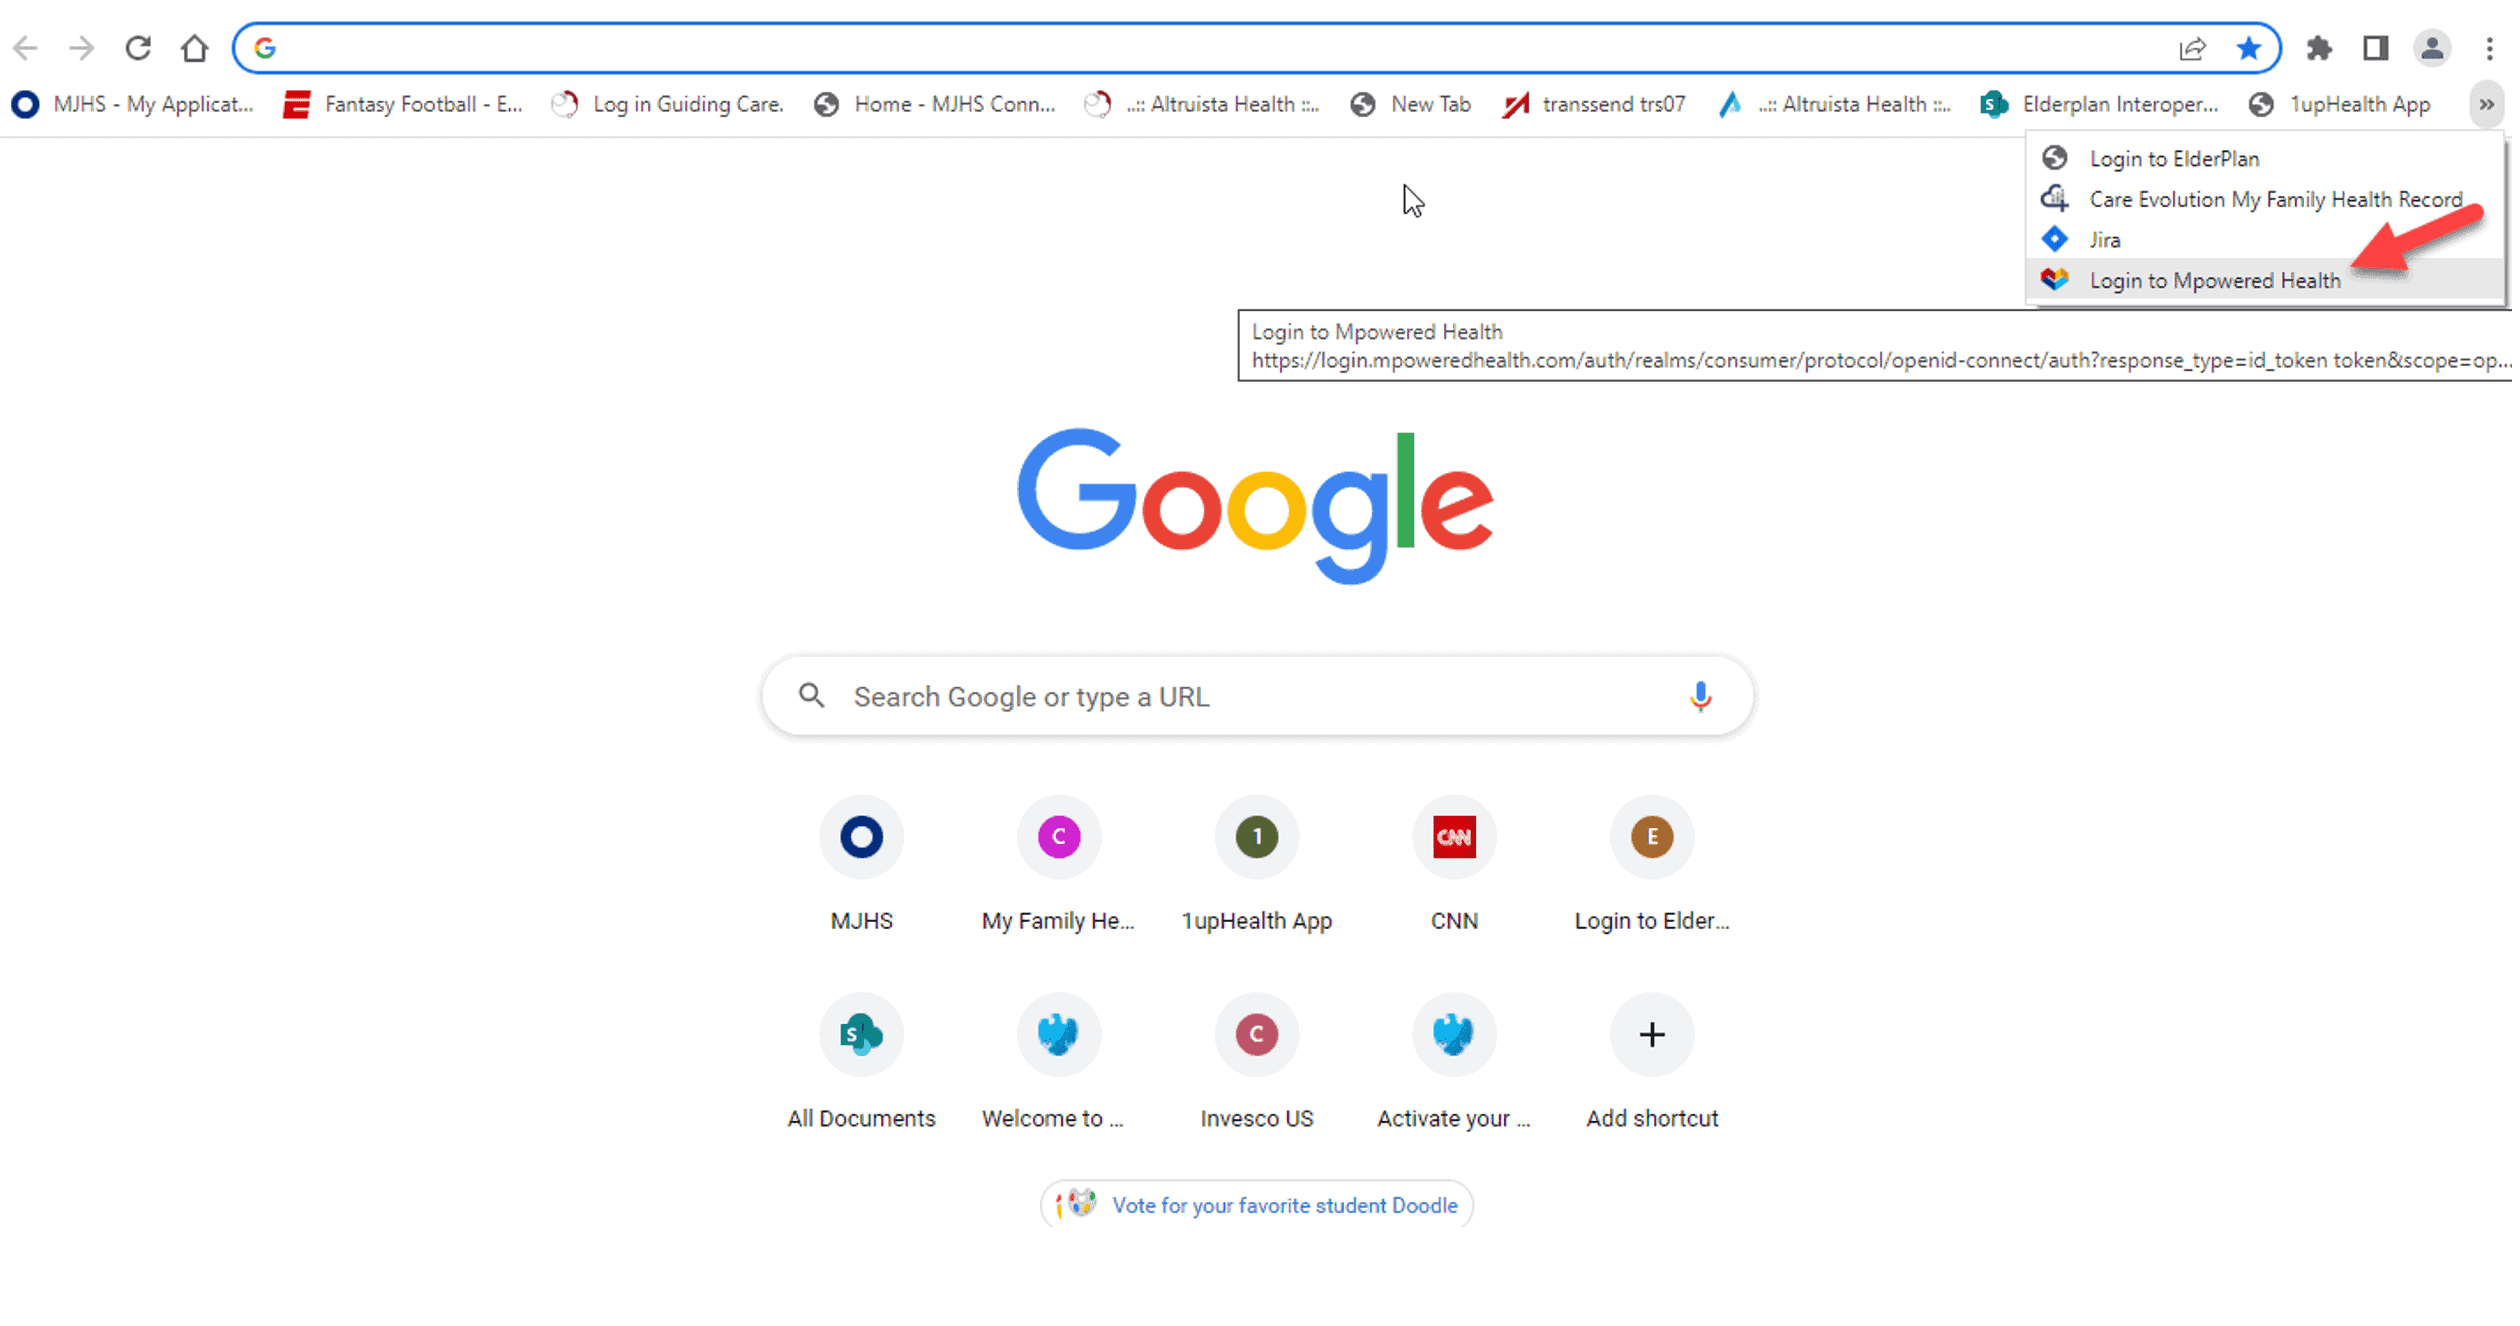 Google home screen with an icon for the mpoweredhealth app